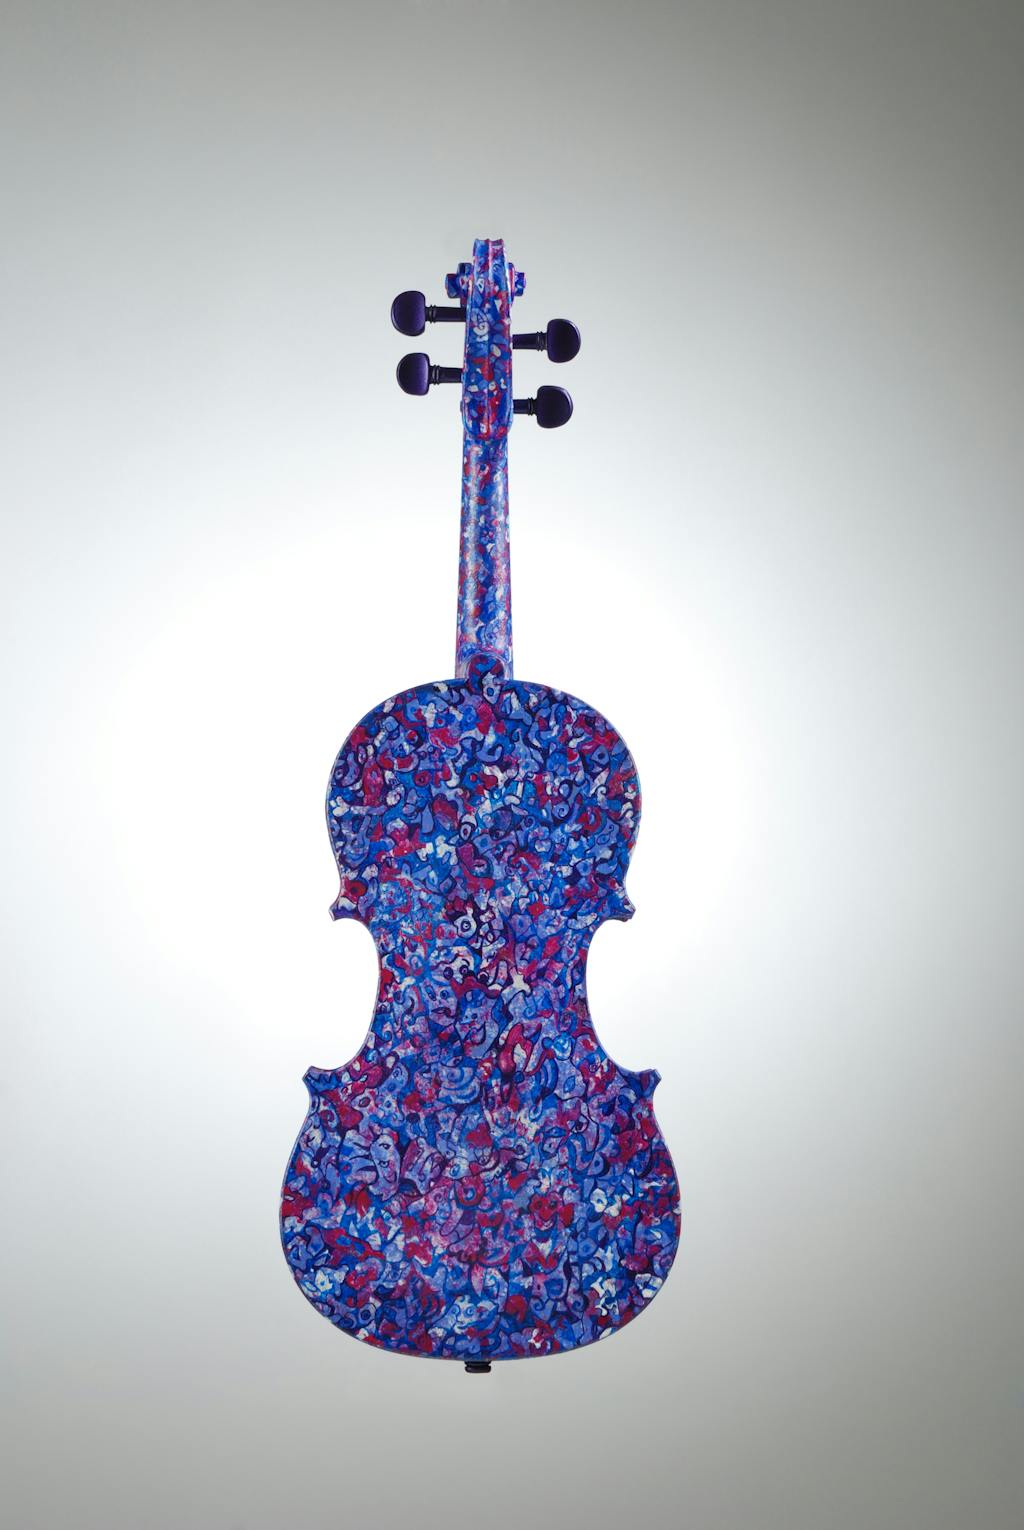 Violin "Lilac", painted by Elena Birkenwald in 2006